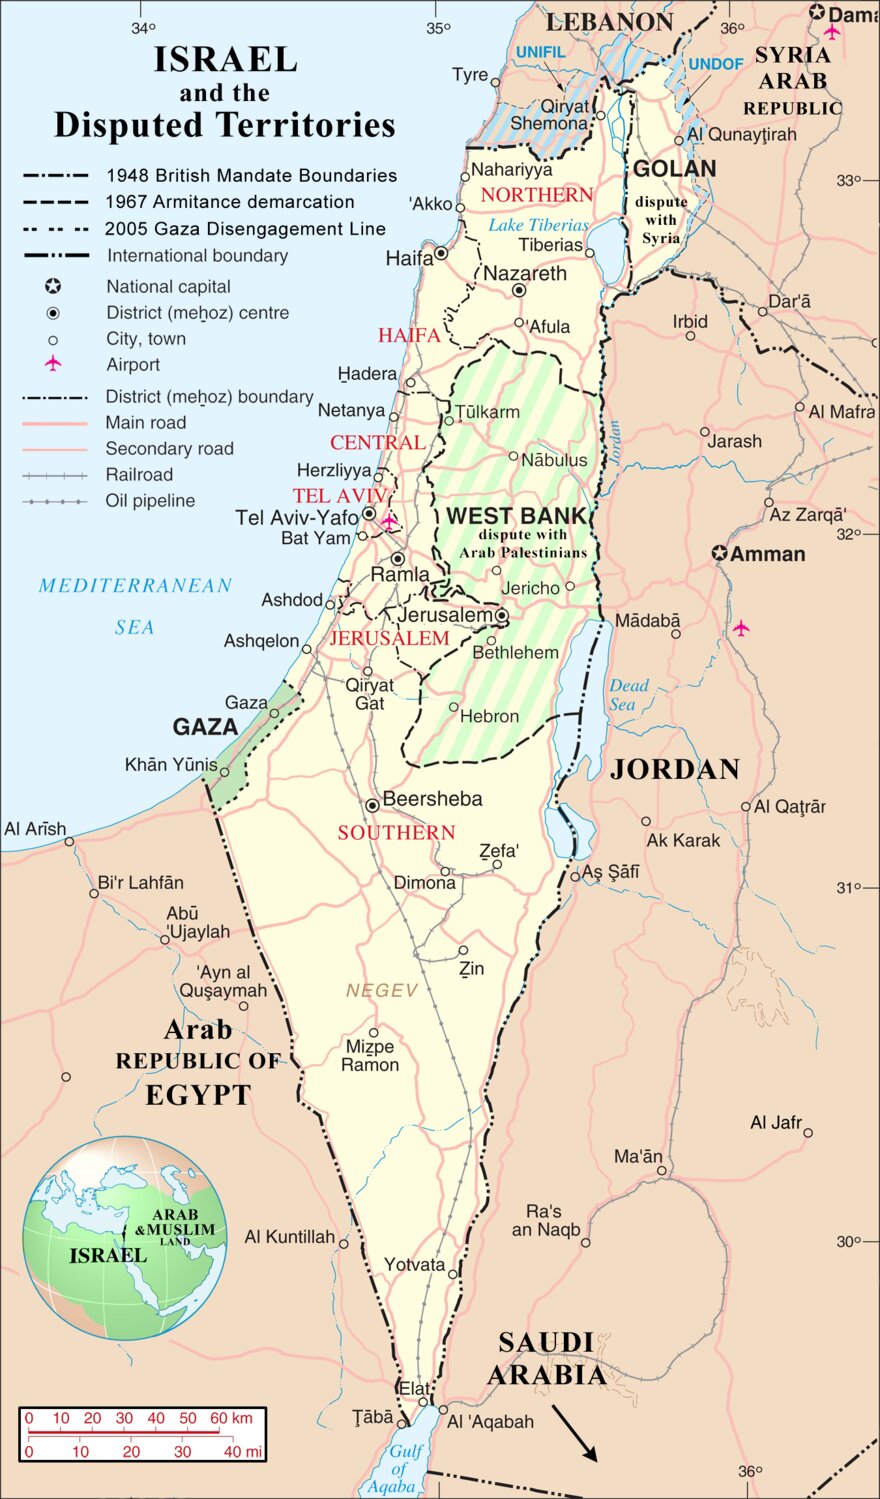 A cartographer’s view of Israel, the Palestinian West Bank and Gaza, as well as the Golan Heights.